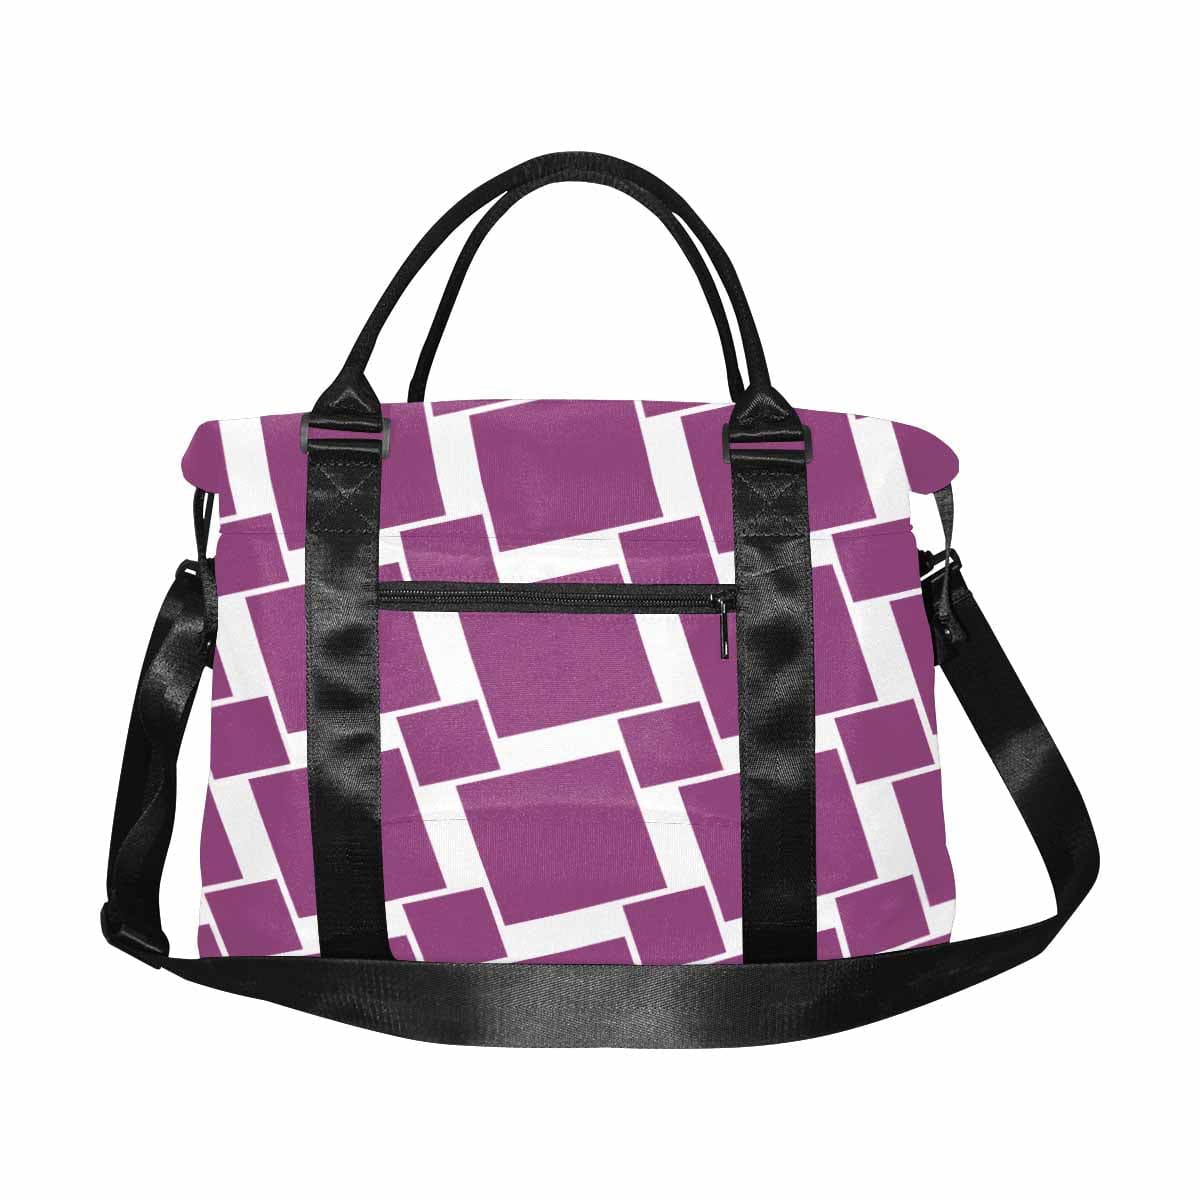 Duffle Bag - Large Capacity - Puce Purple - Bags | Travel Bags | Canvas Carry